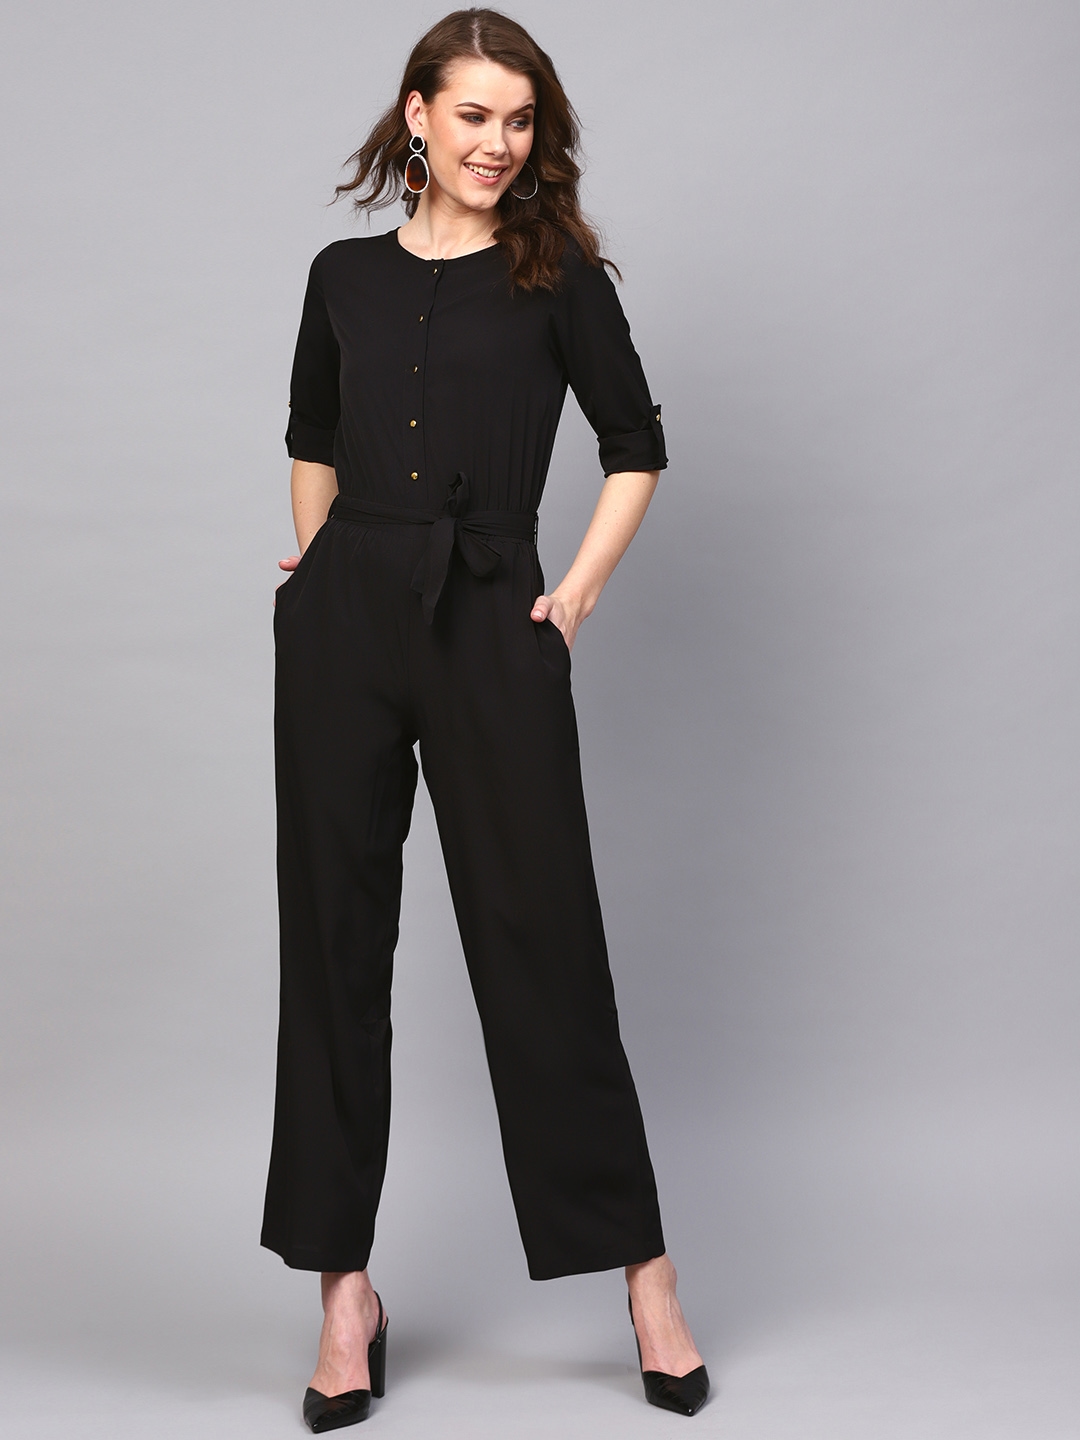 Buy Black Jumpsuits Playsuits for Women by ATHENA Online  Ajiocom